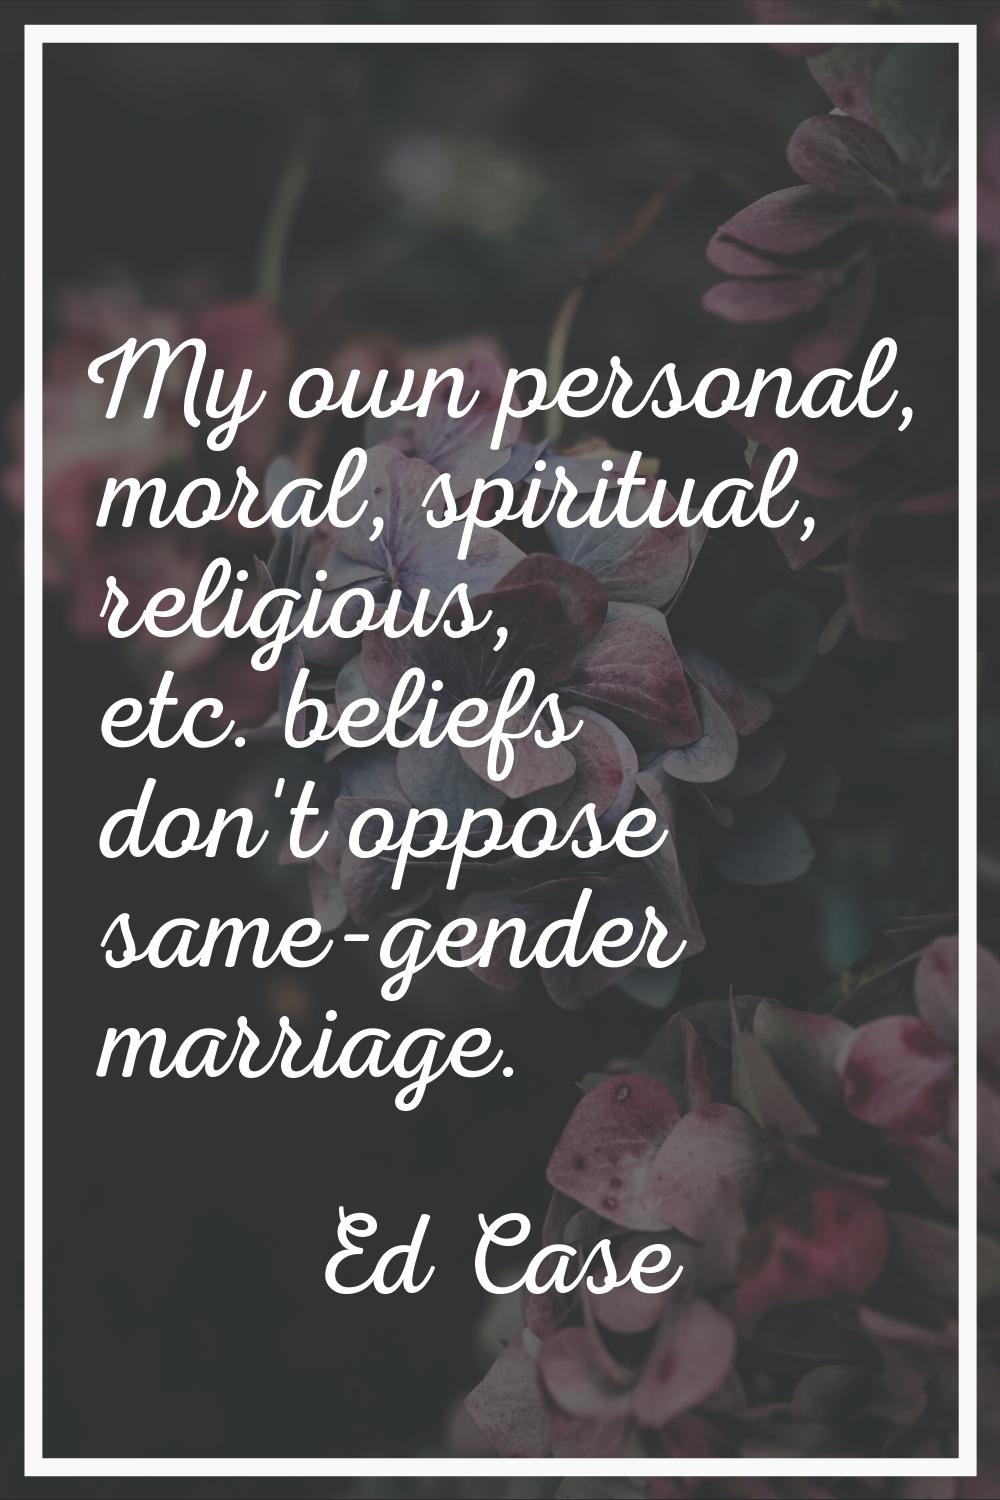 My own personal, moral, spiritual, religious, etc. beliefs don't oppose same-gender marriage.